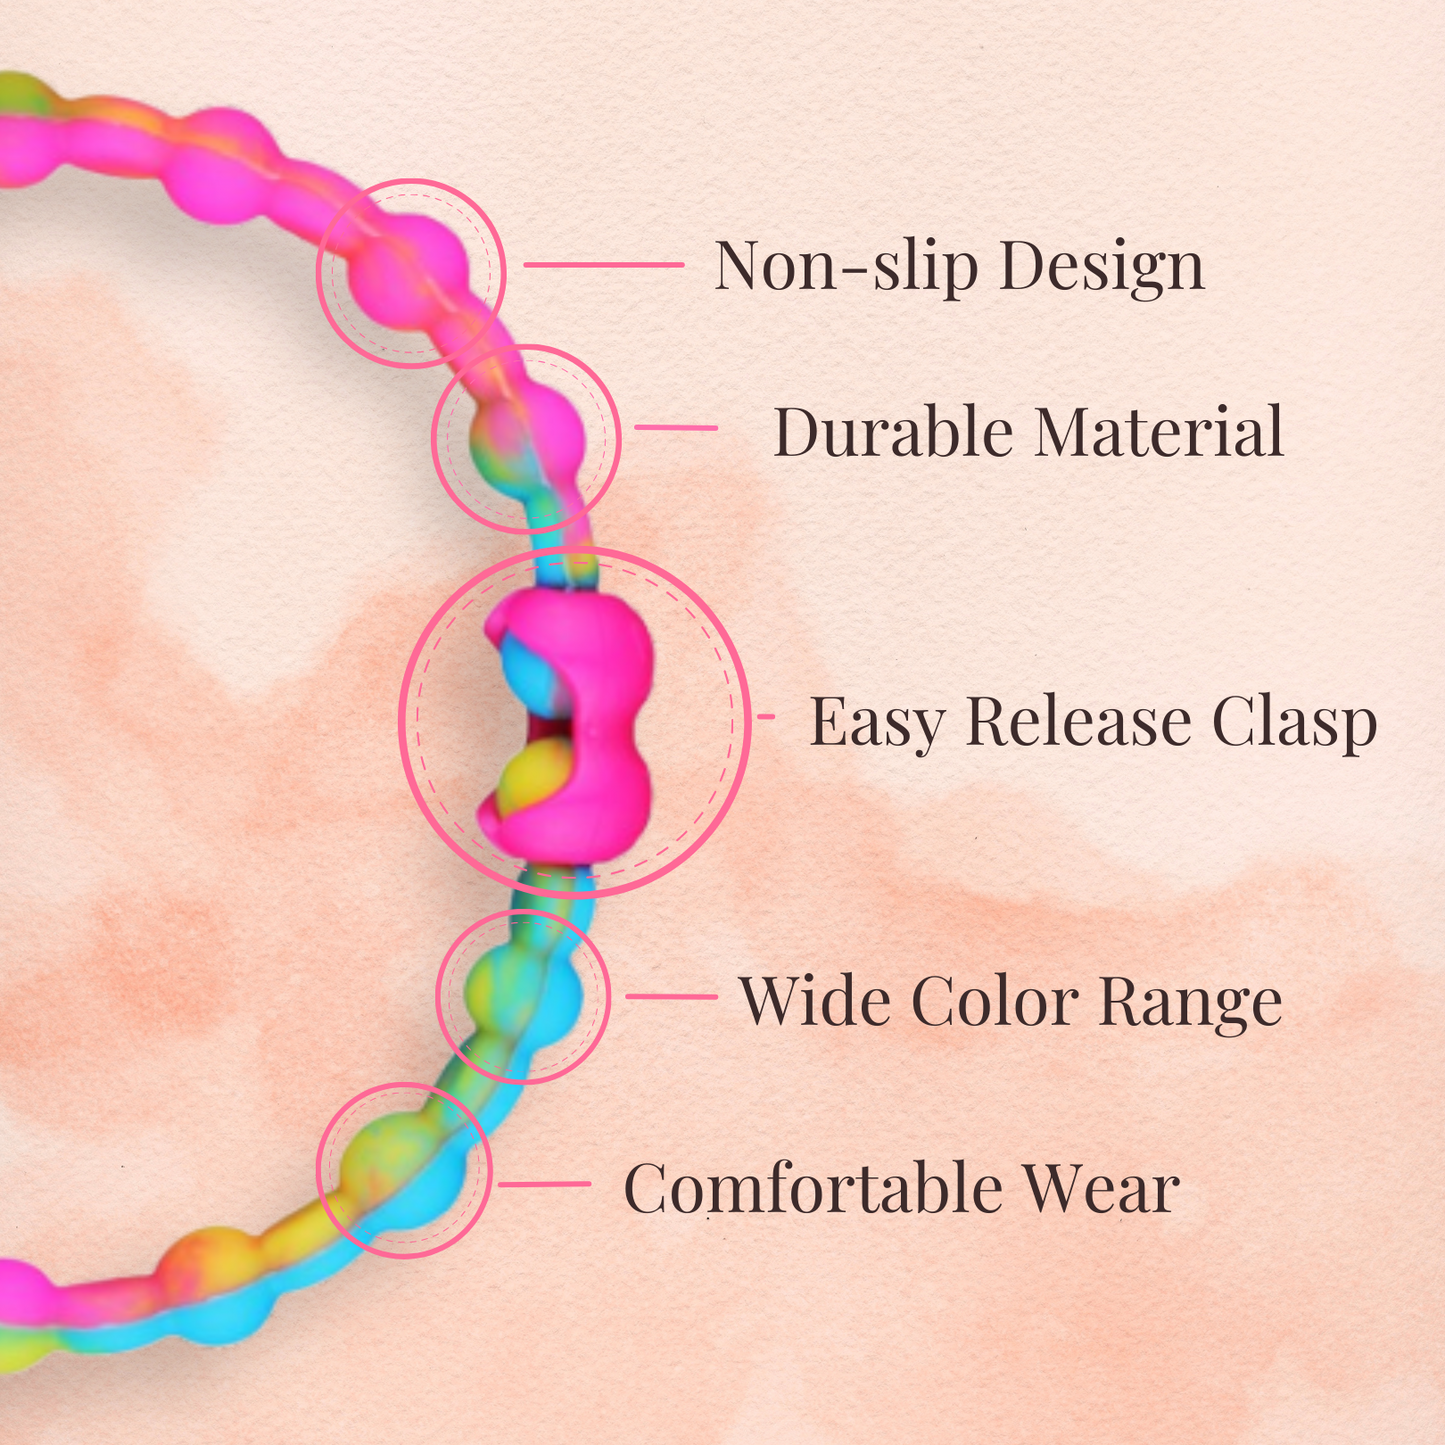 Clear Black Mix Hair Ties (8 Pack) - The Essential Hair Accessory for Every Style